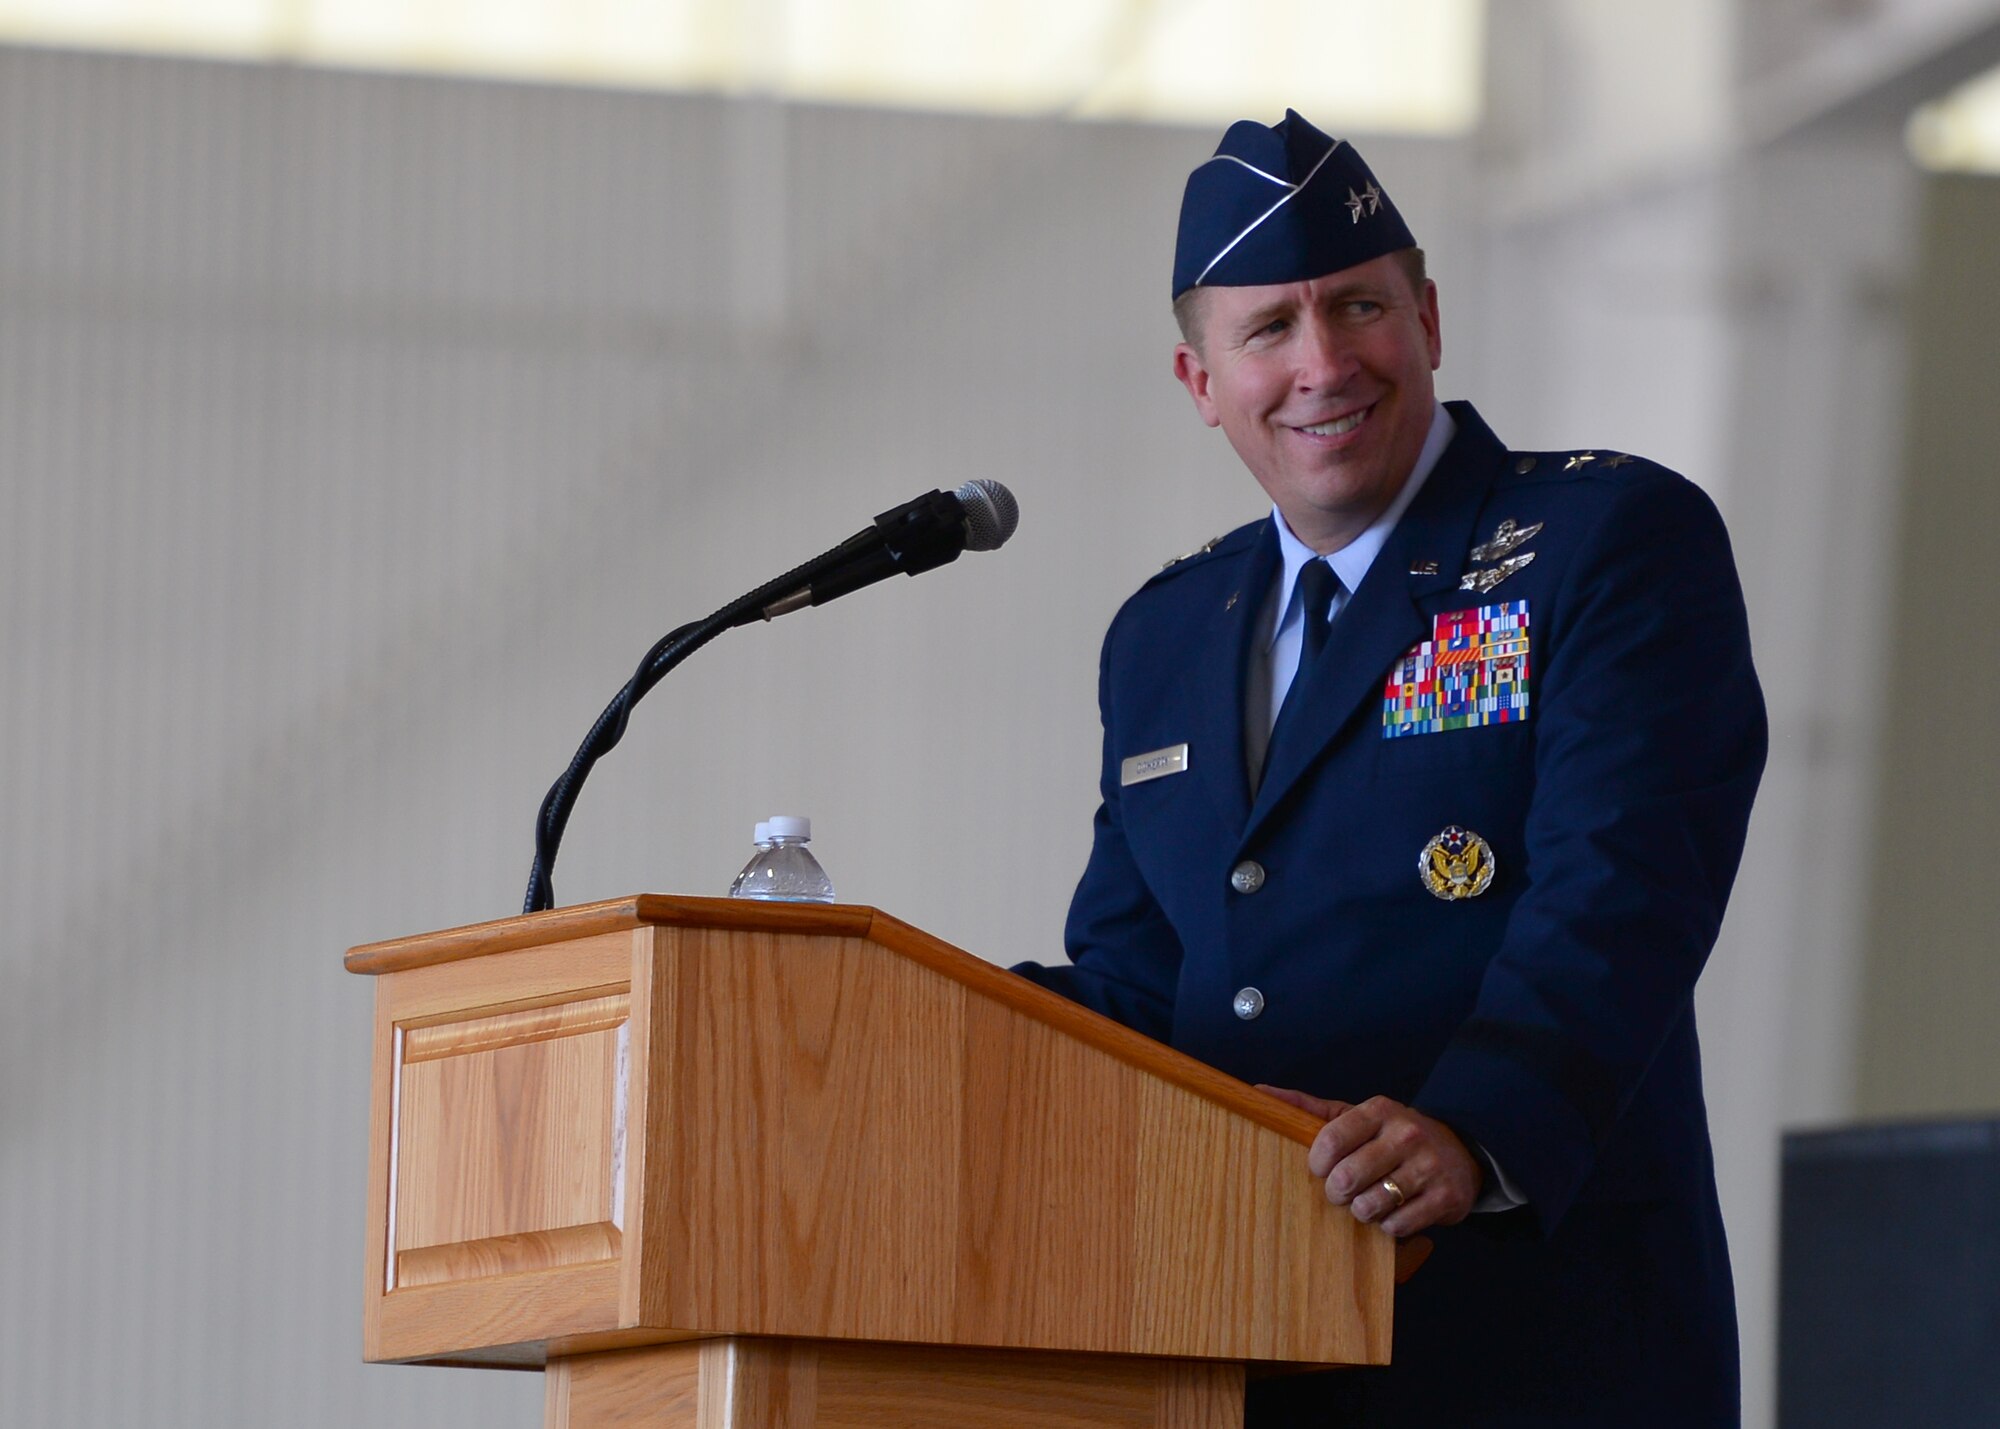 U.S. Air Force Major General Patrick Doherty, 19th Air Force commander, observes the audience for the 47th Flying Training Wing’s change of command ceremony at Laughlin Air Force Base, Tx., June 28, 2017.  General Doherty is a command pilot with more than 3,800 flying hours, and commands more than 32,000 personnel. 